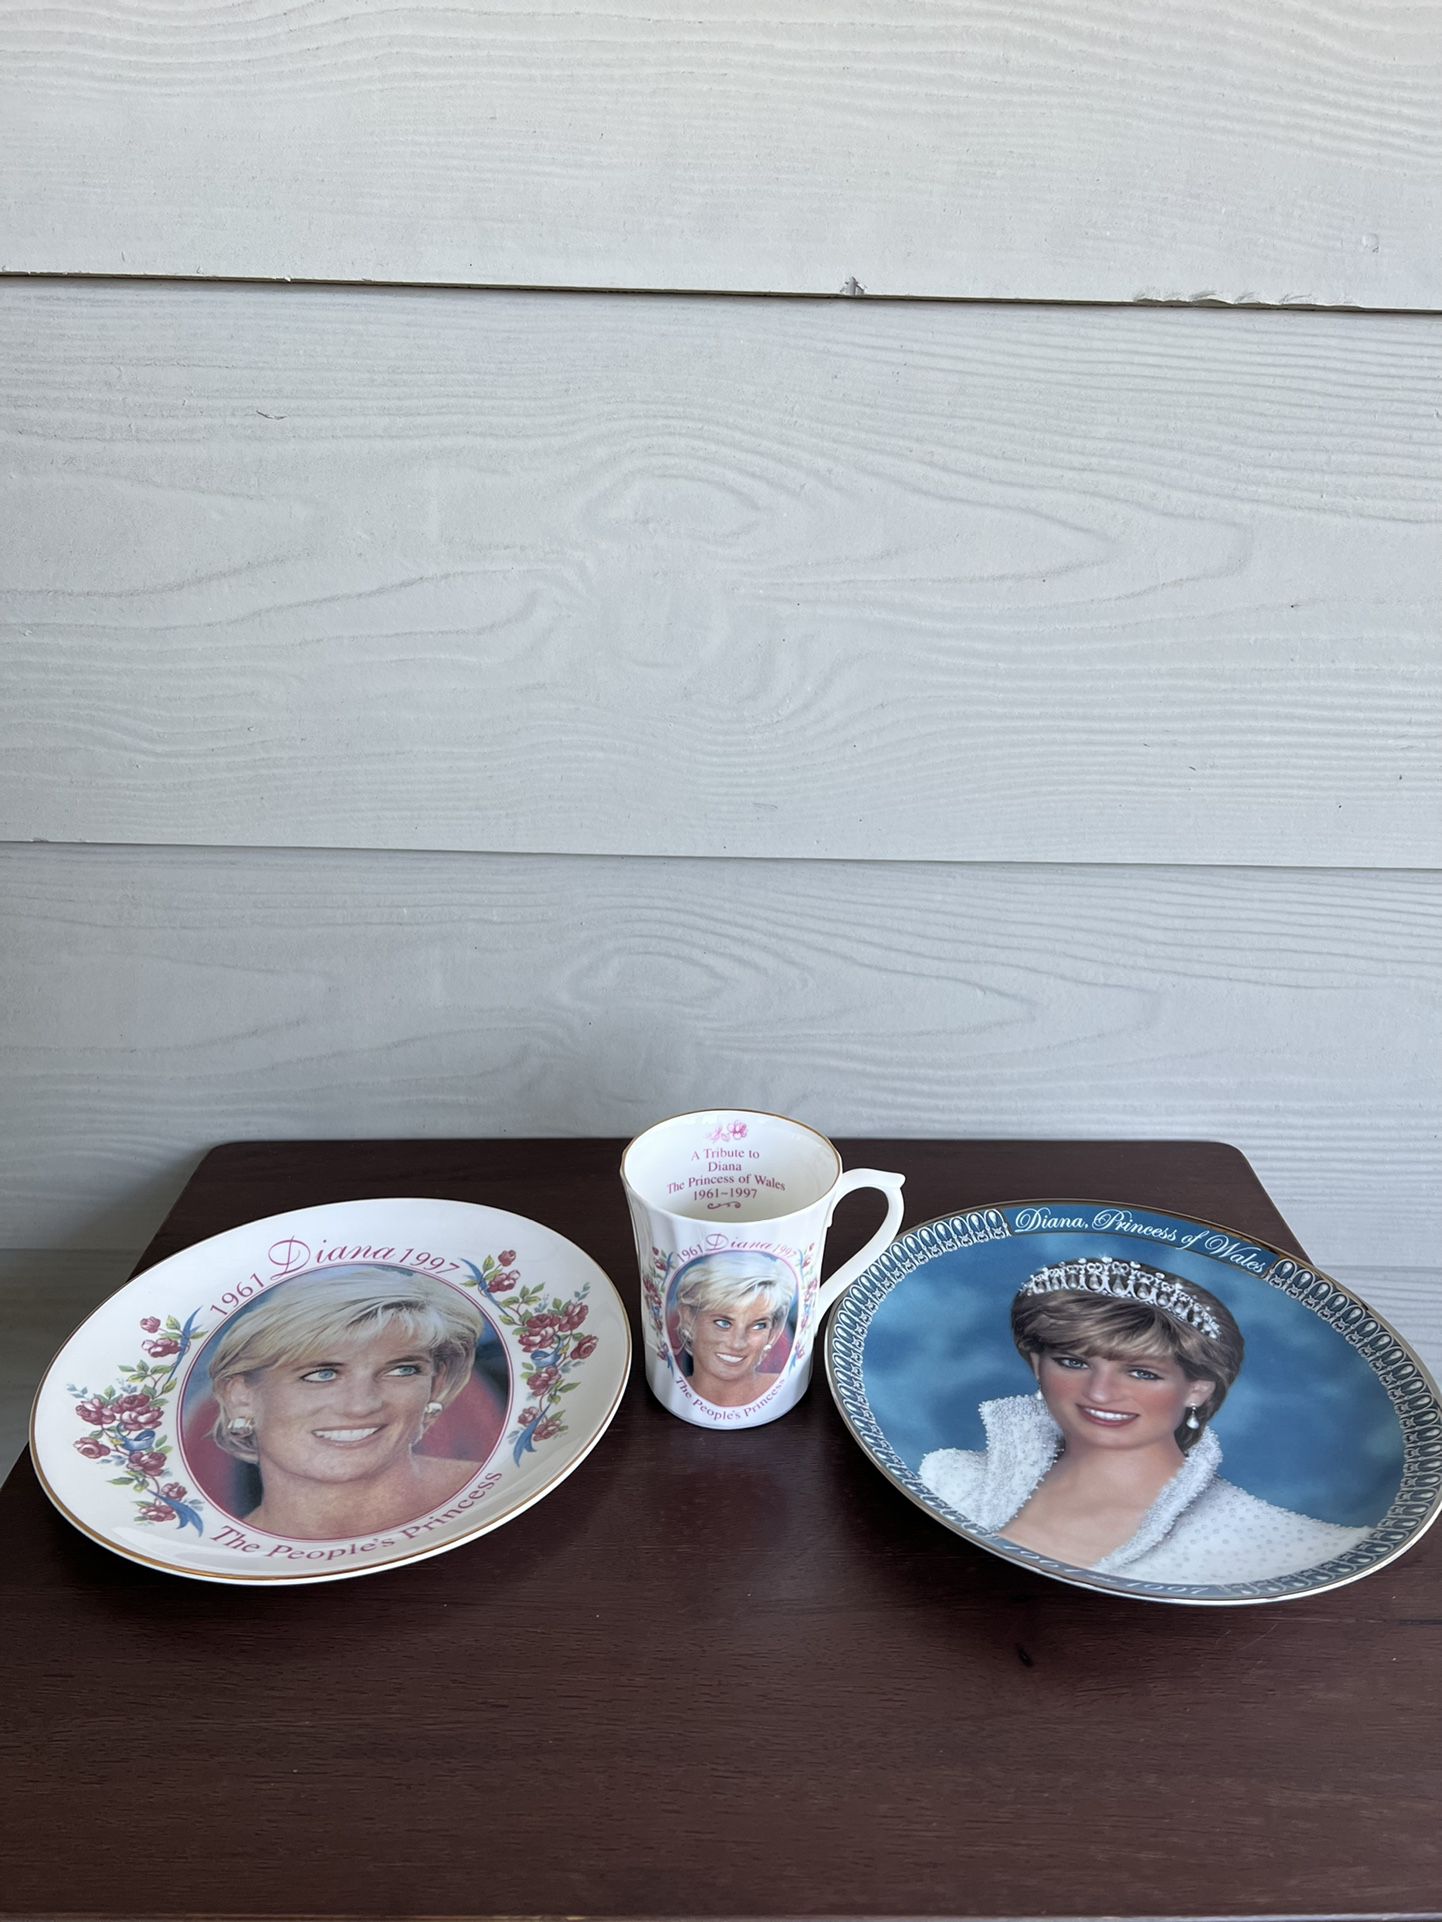 Allyn Nelson Lot Of 3 Pieces Diana Princess 1(contact info removed) Tribute Plate F Porcelain